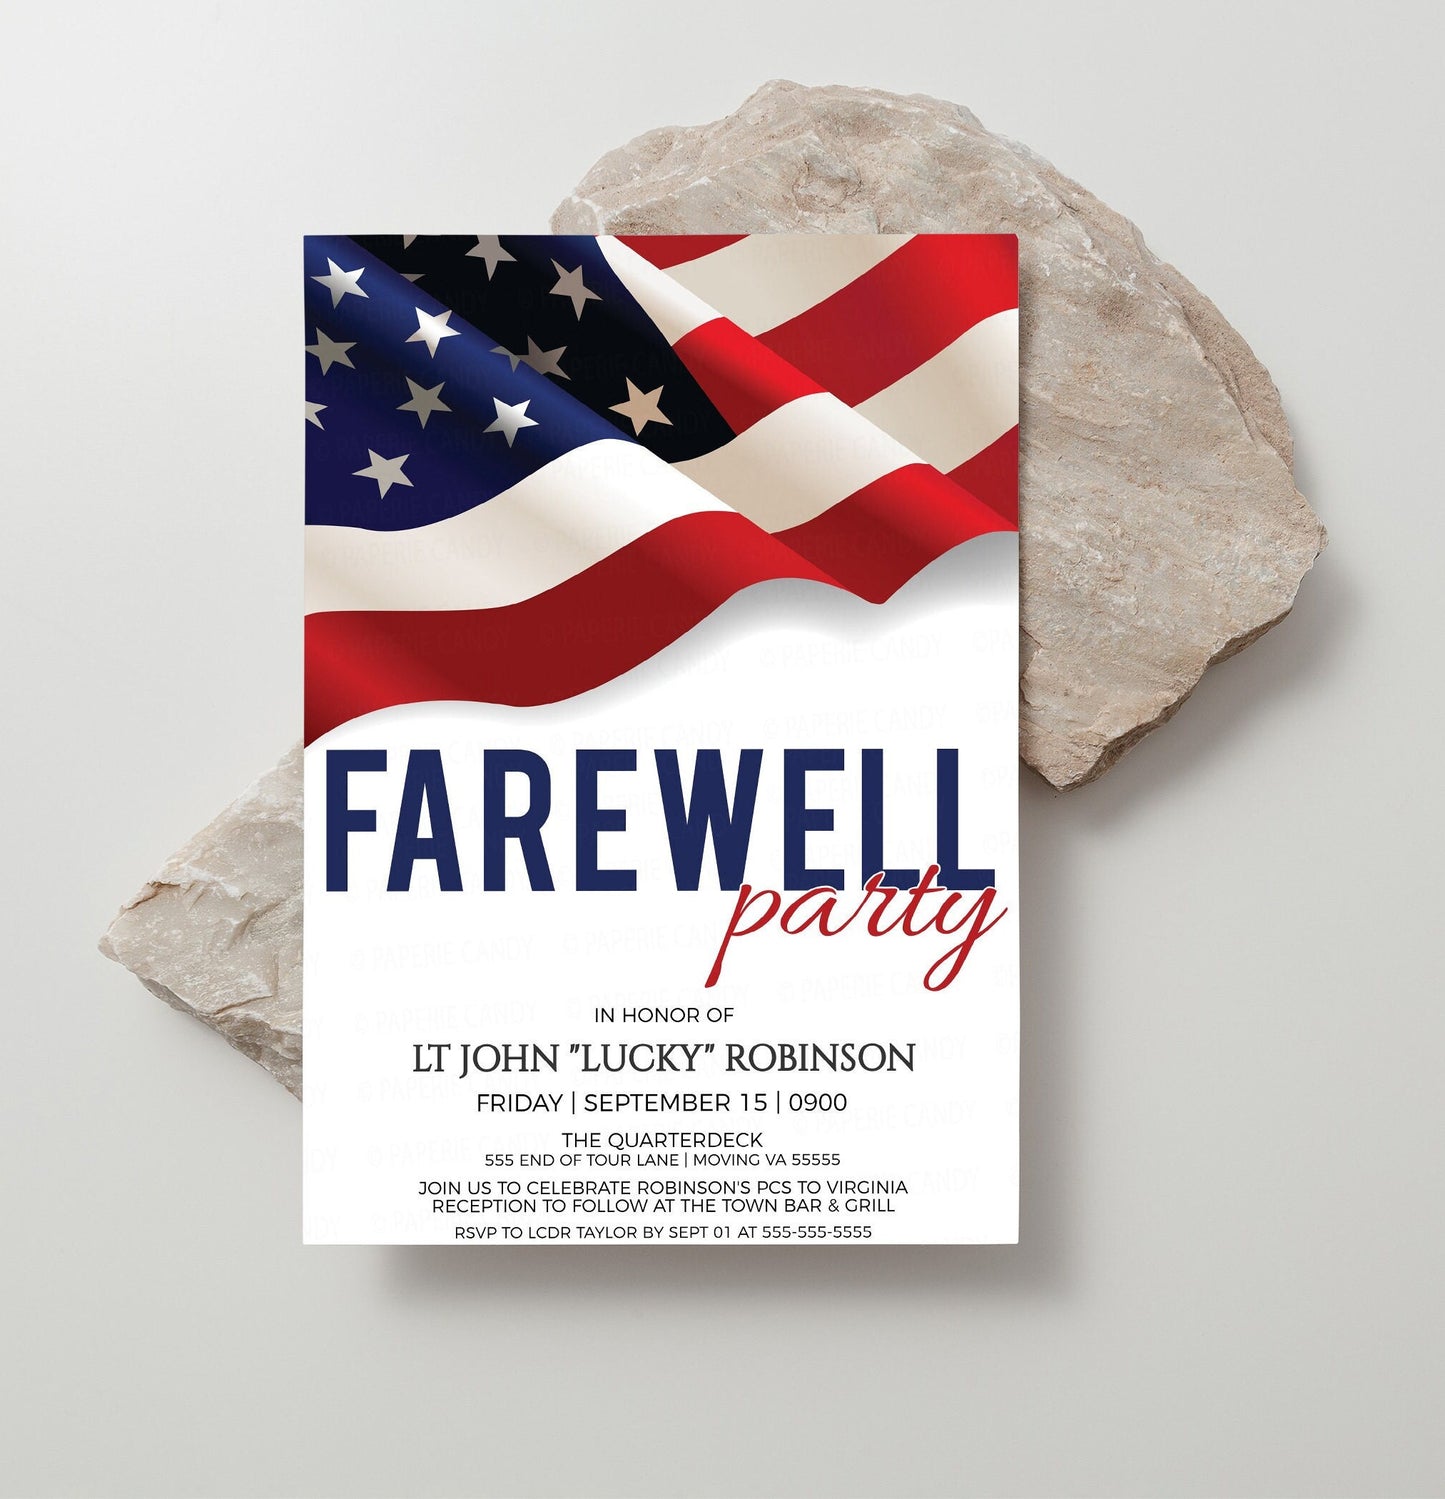 Military Farewell Party Invitation, American Flag Invite, Hail & Bail Farewell, Change of Command Event, Navy Army Marines Air Force, Police